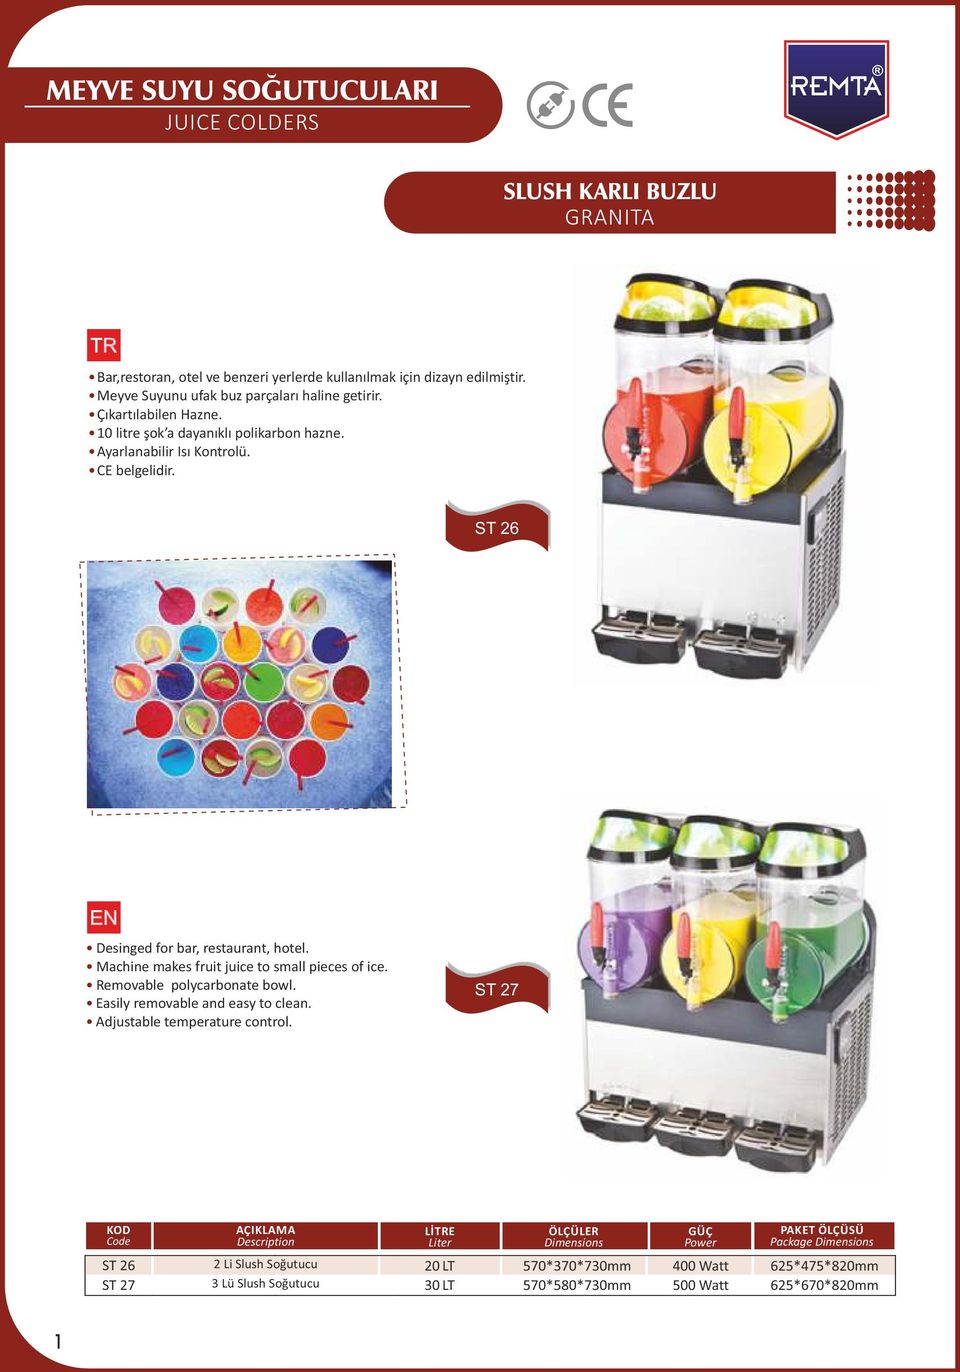 ST 26 Desinged for bar, restaurant, hotel. Machine makes fruit juice to small pieces of ice. Removable polycarbonate bowl. Easily removable and easy to clean.